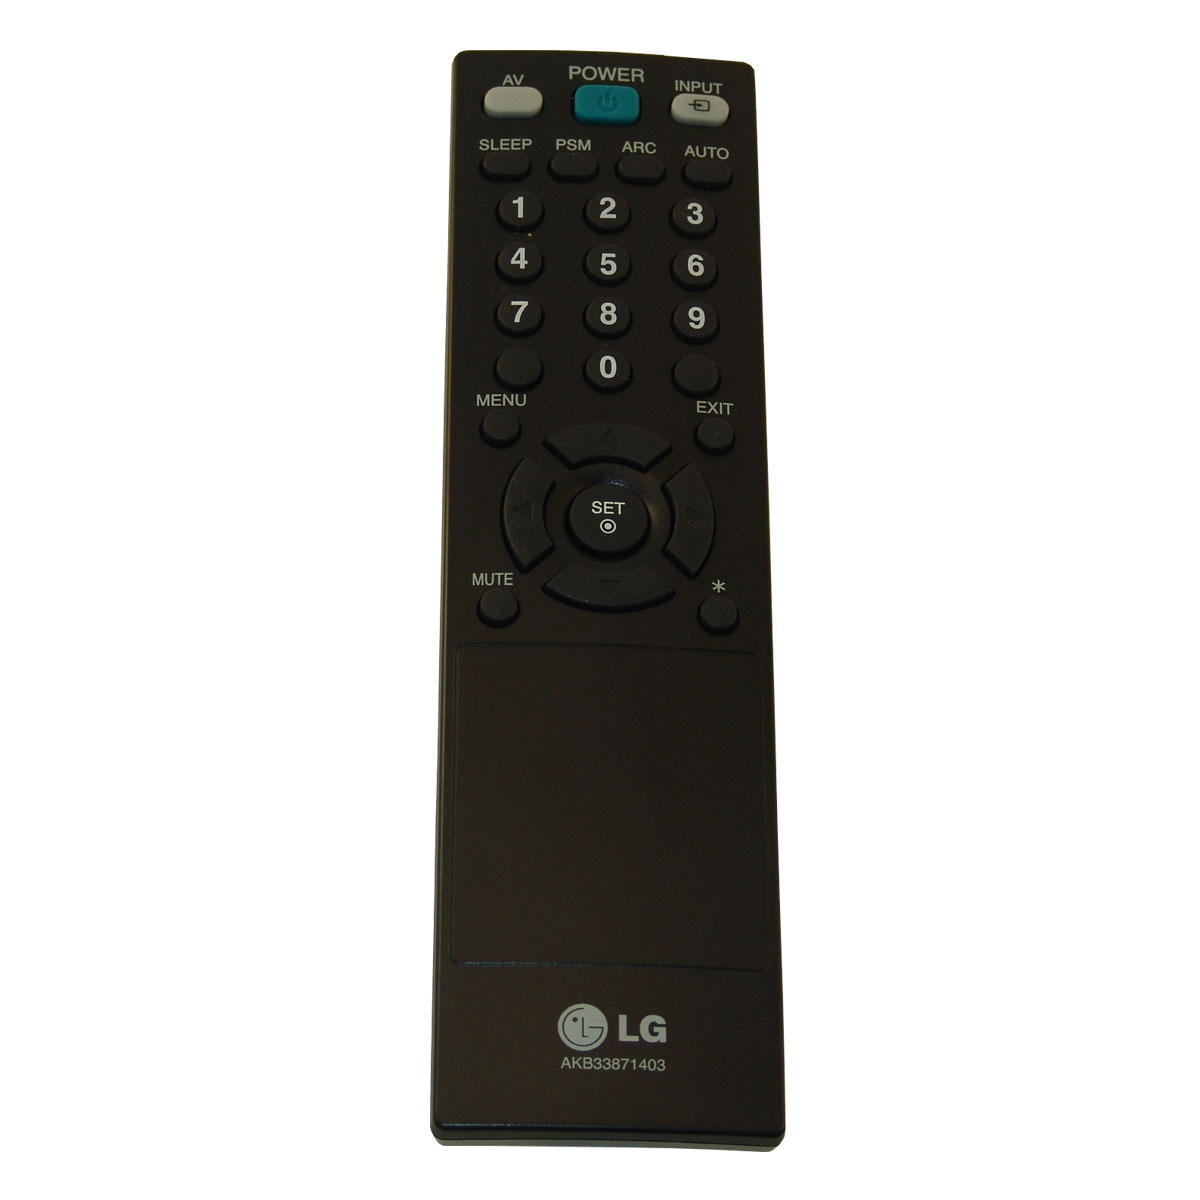 LG AKB33871403 replacement remote control different look